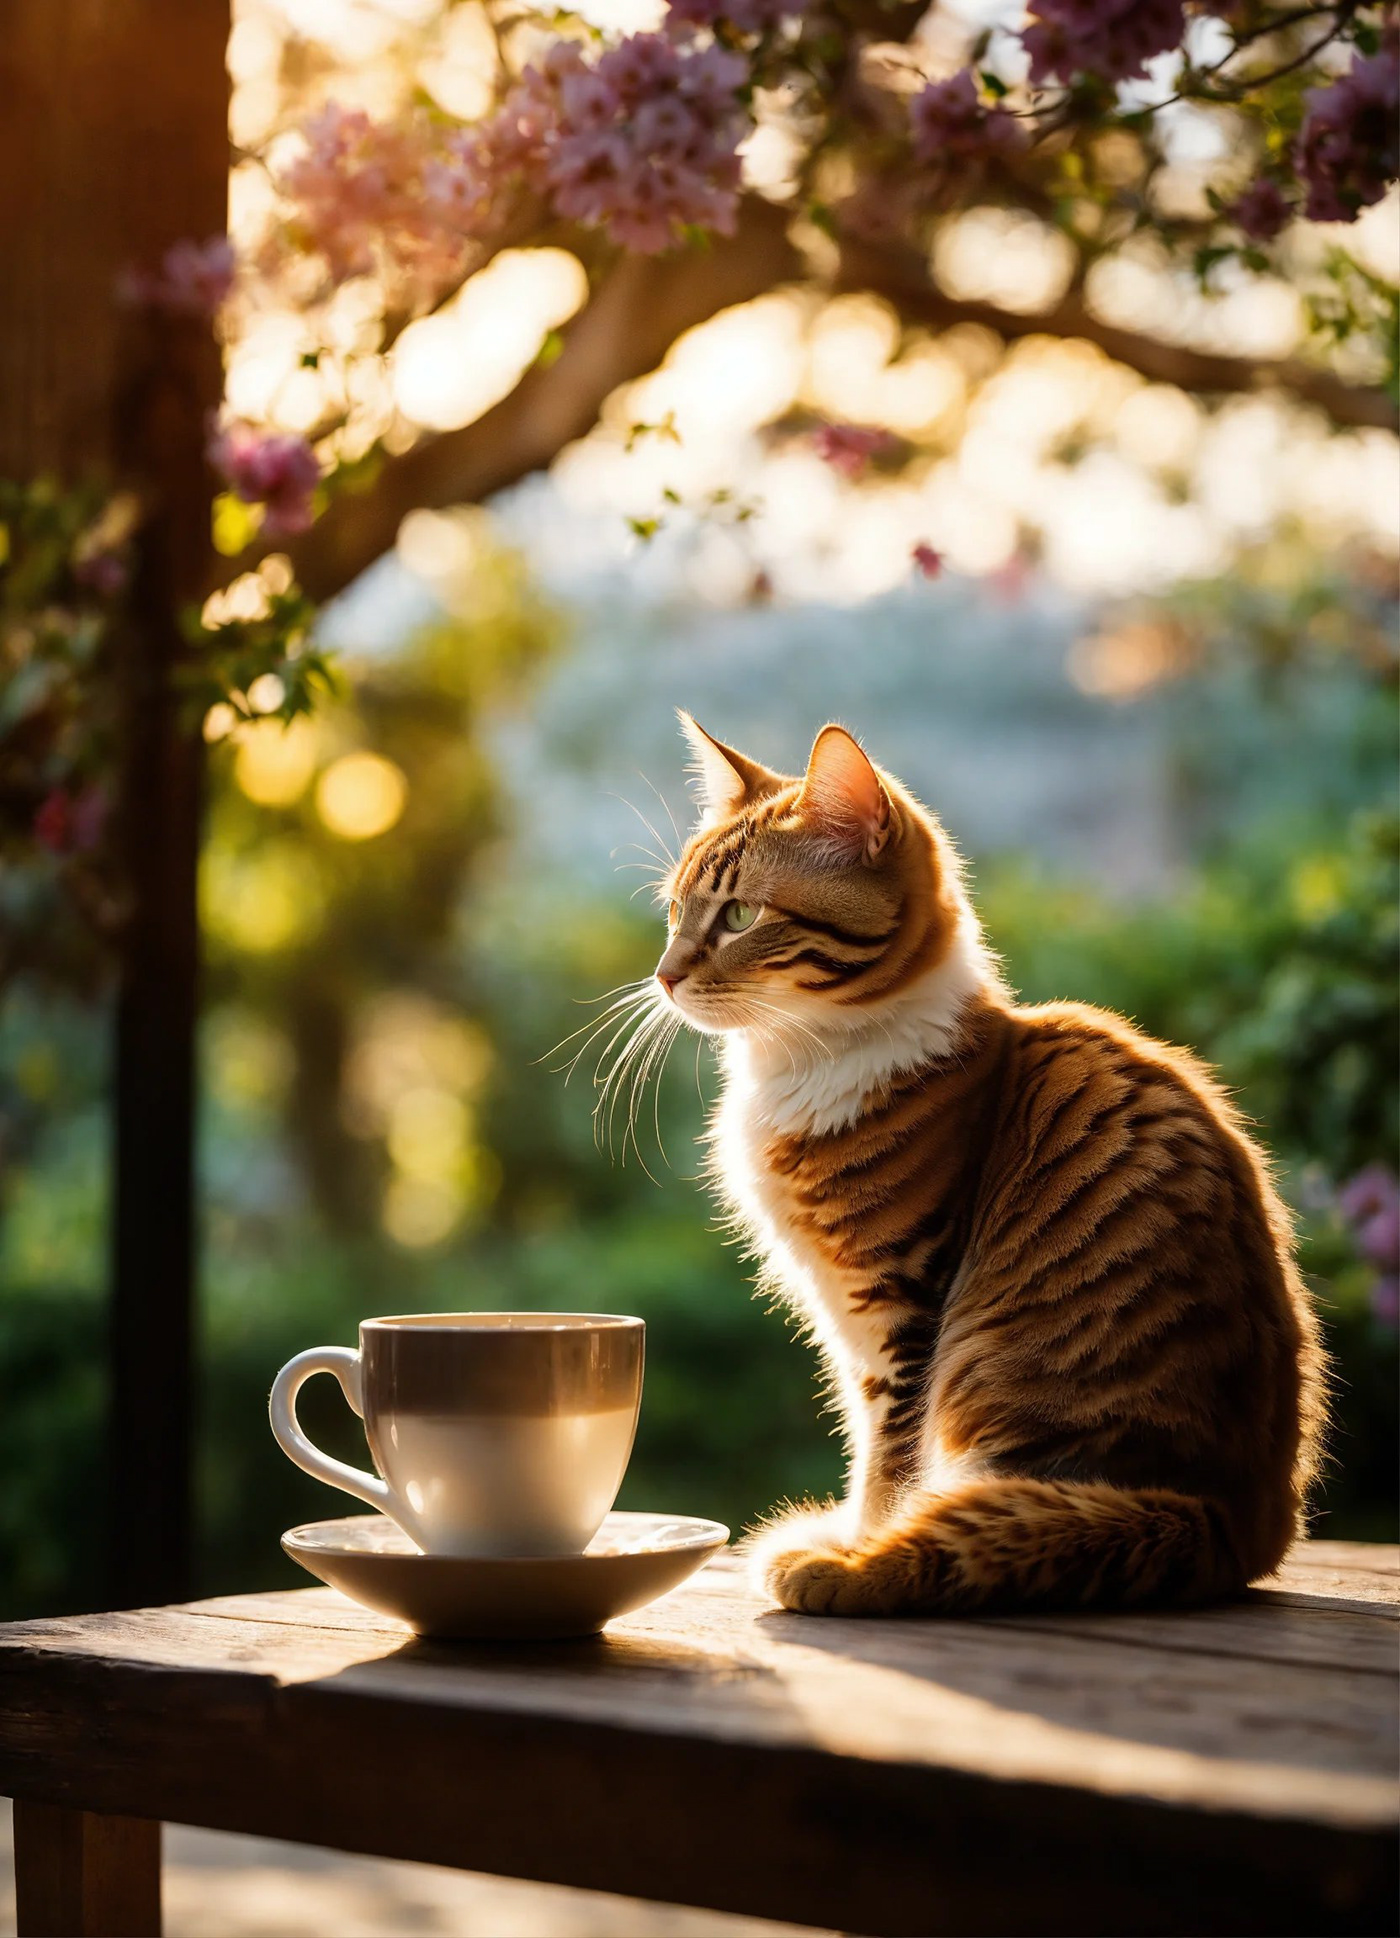 Cat MORNING relax relationship mindset Coffee kindness activity cooperation positivity Enthusiasm motivation tolerance attention Optimism compassion vitality communication inspiration care encouragement